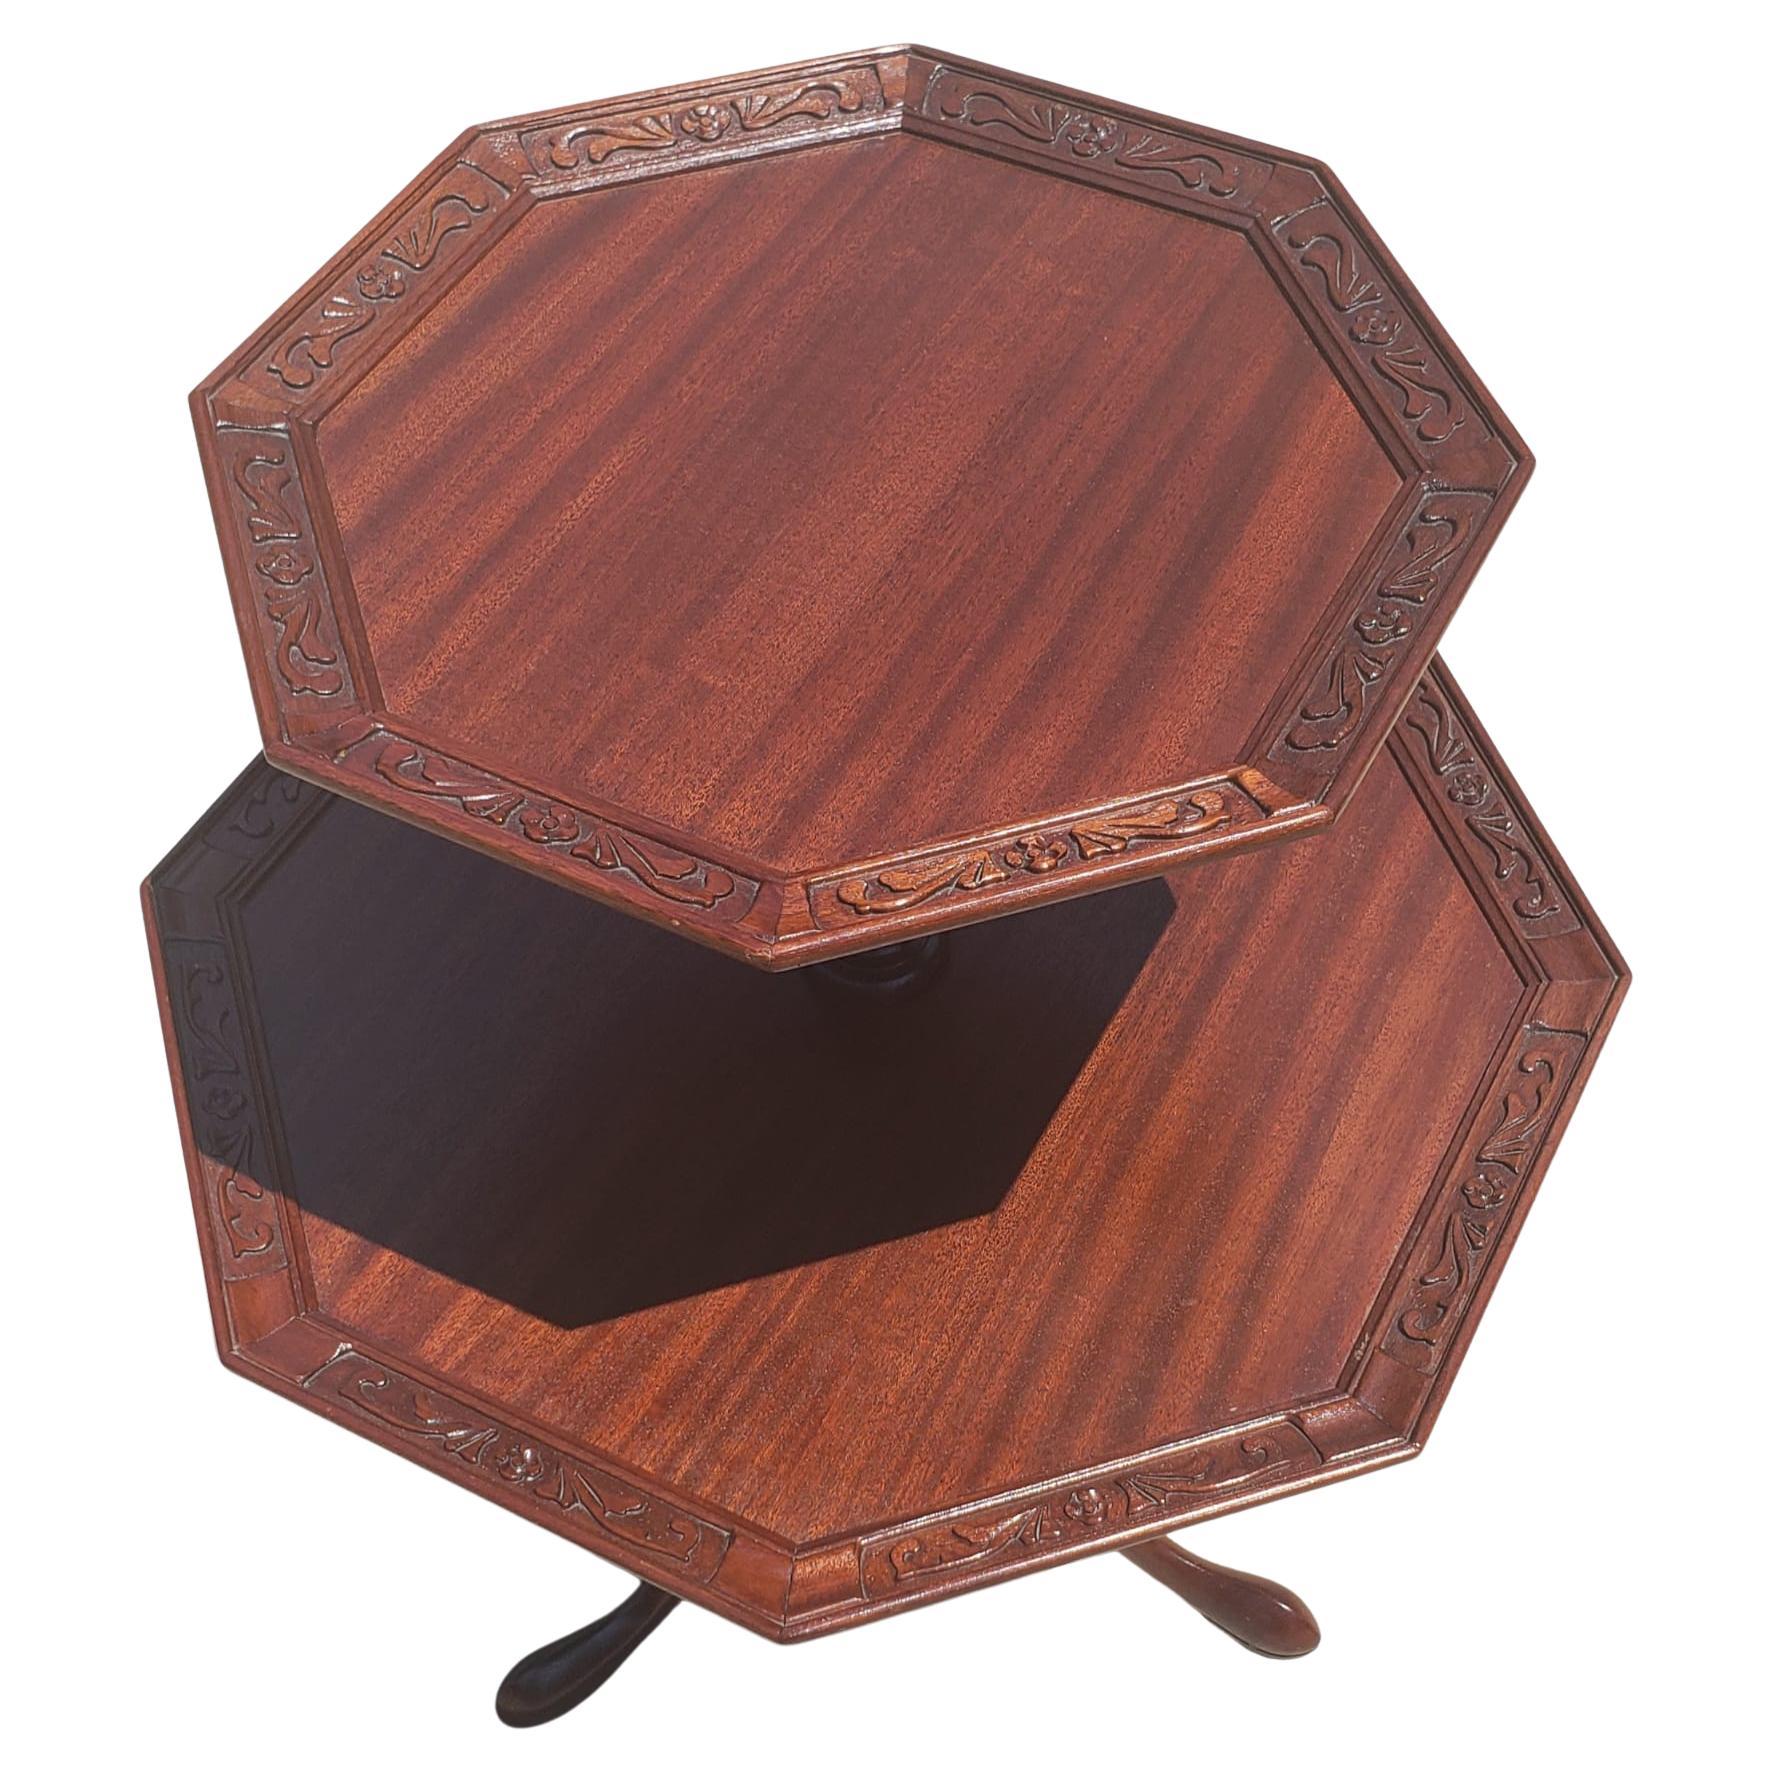 An exquisite George III Style  Two-Tier Mahogany Carved Hexagonal dump waiter from the 1940s in very good vintage condition. Measures 25.5